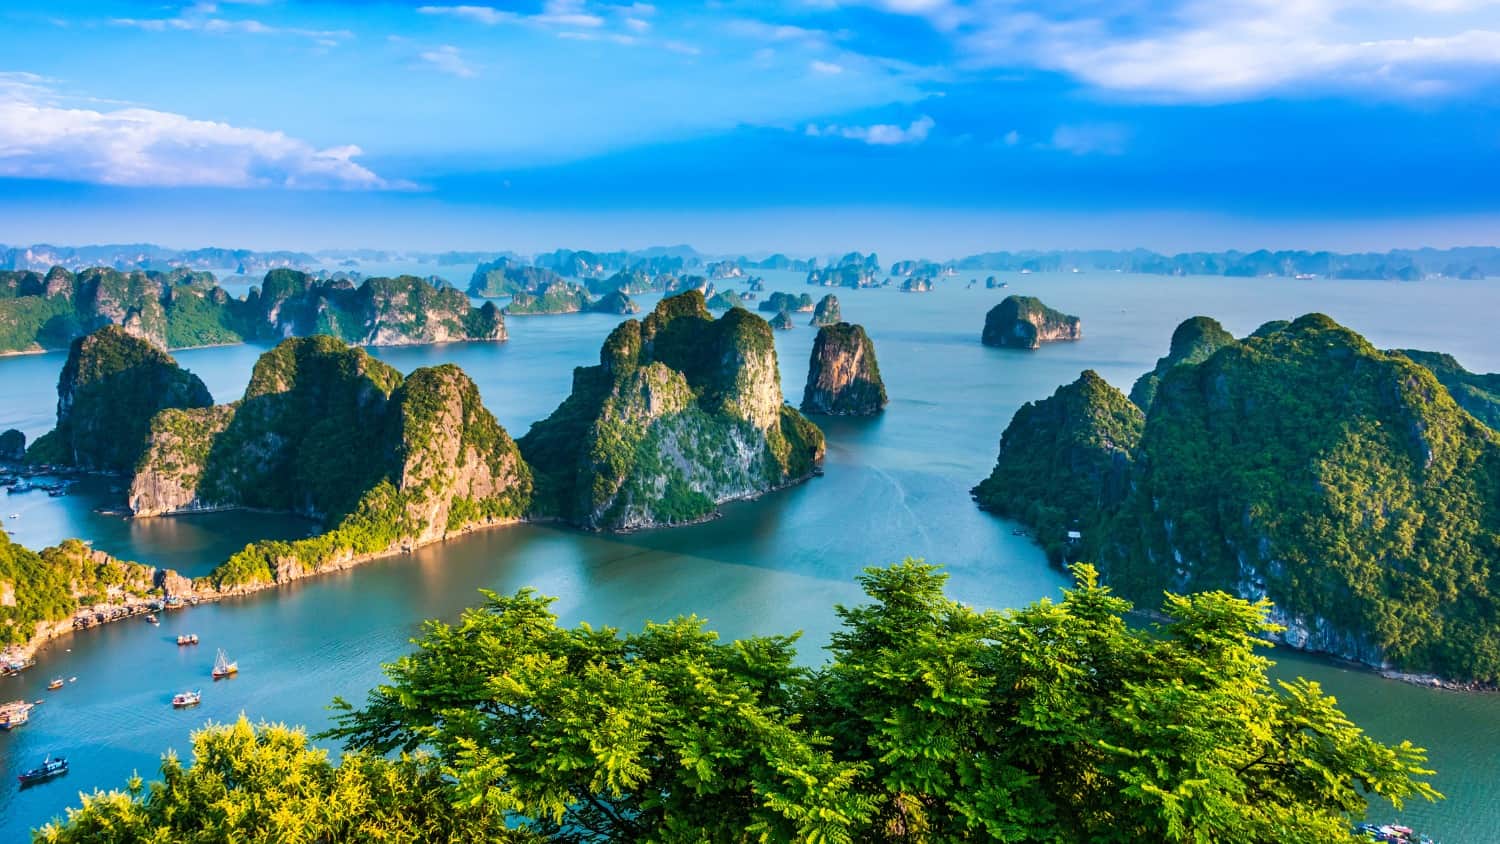 Exploring Ha Noi and Ha Long is a once-in-a-lifetime experience